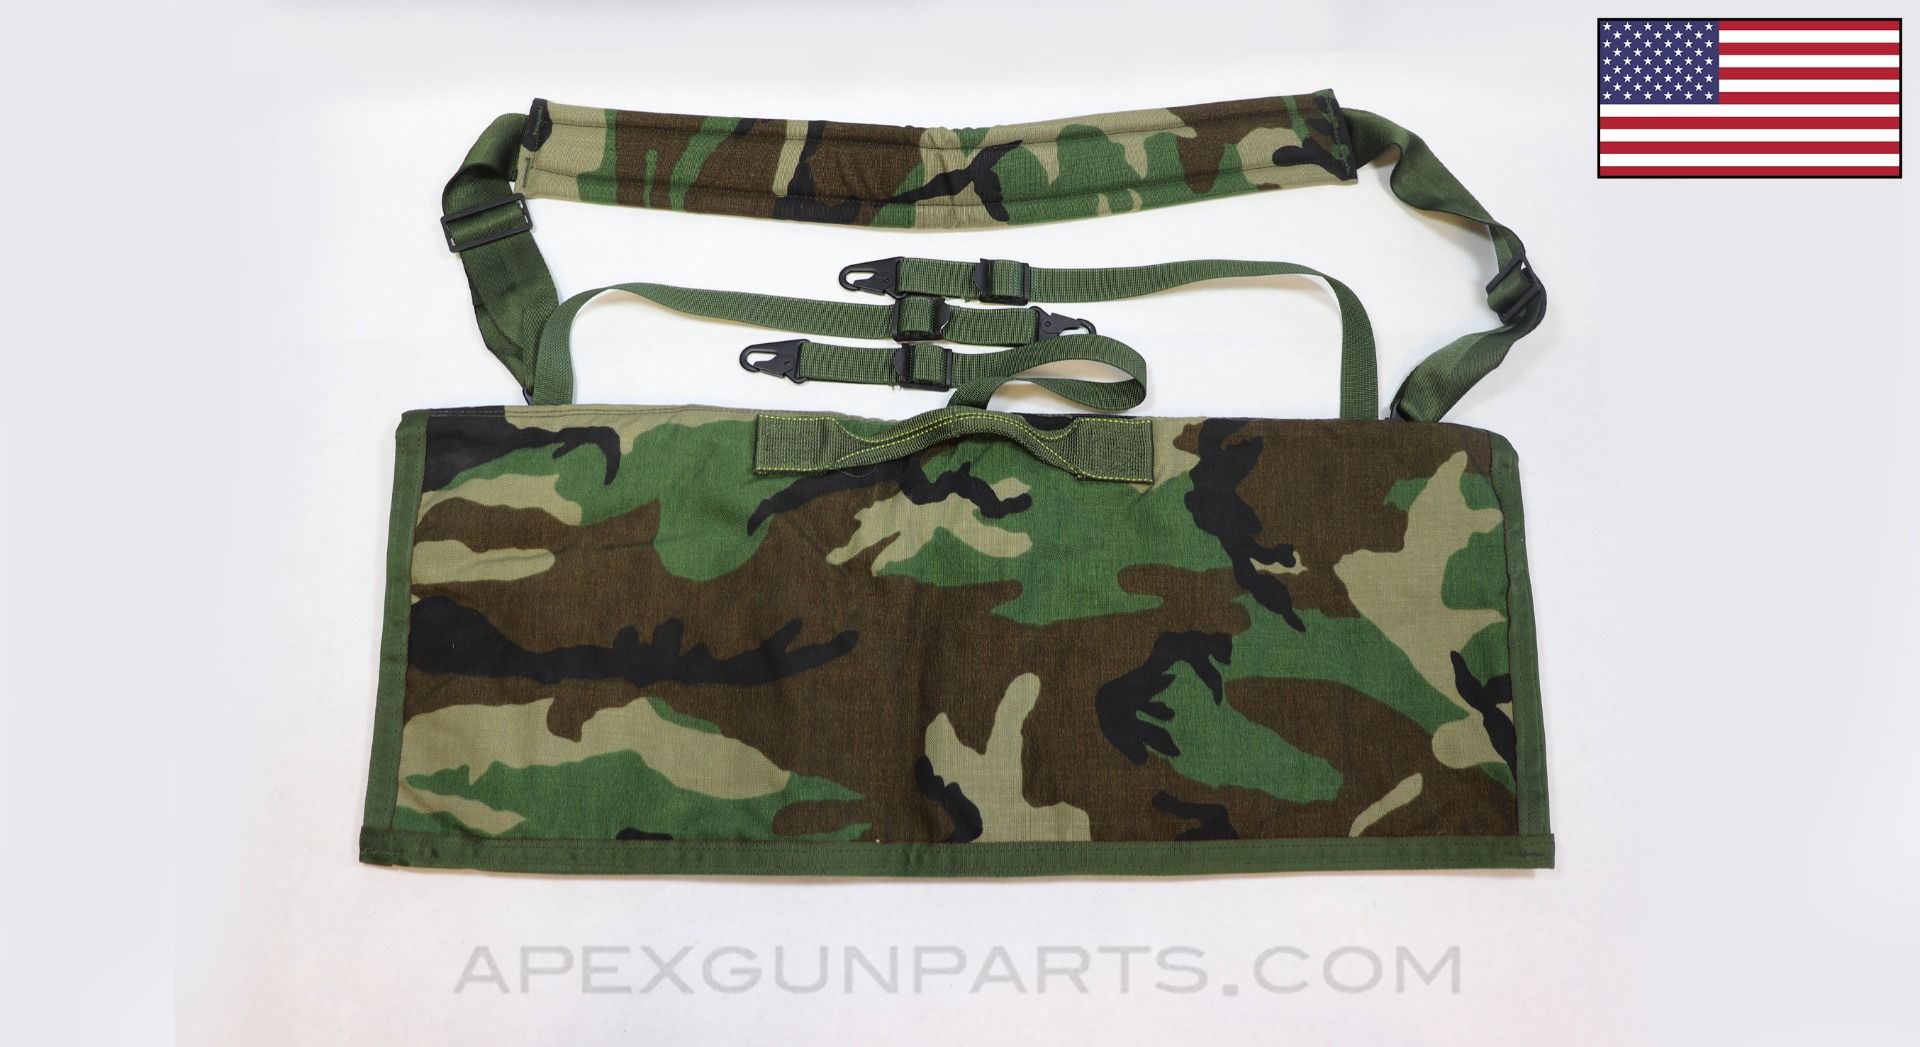 AIMS Stock and Barrel Pouch